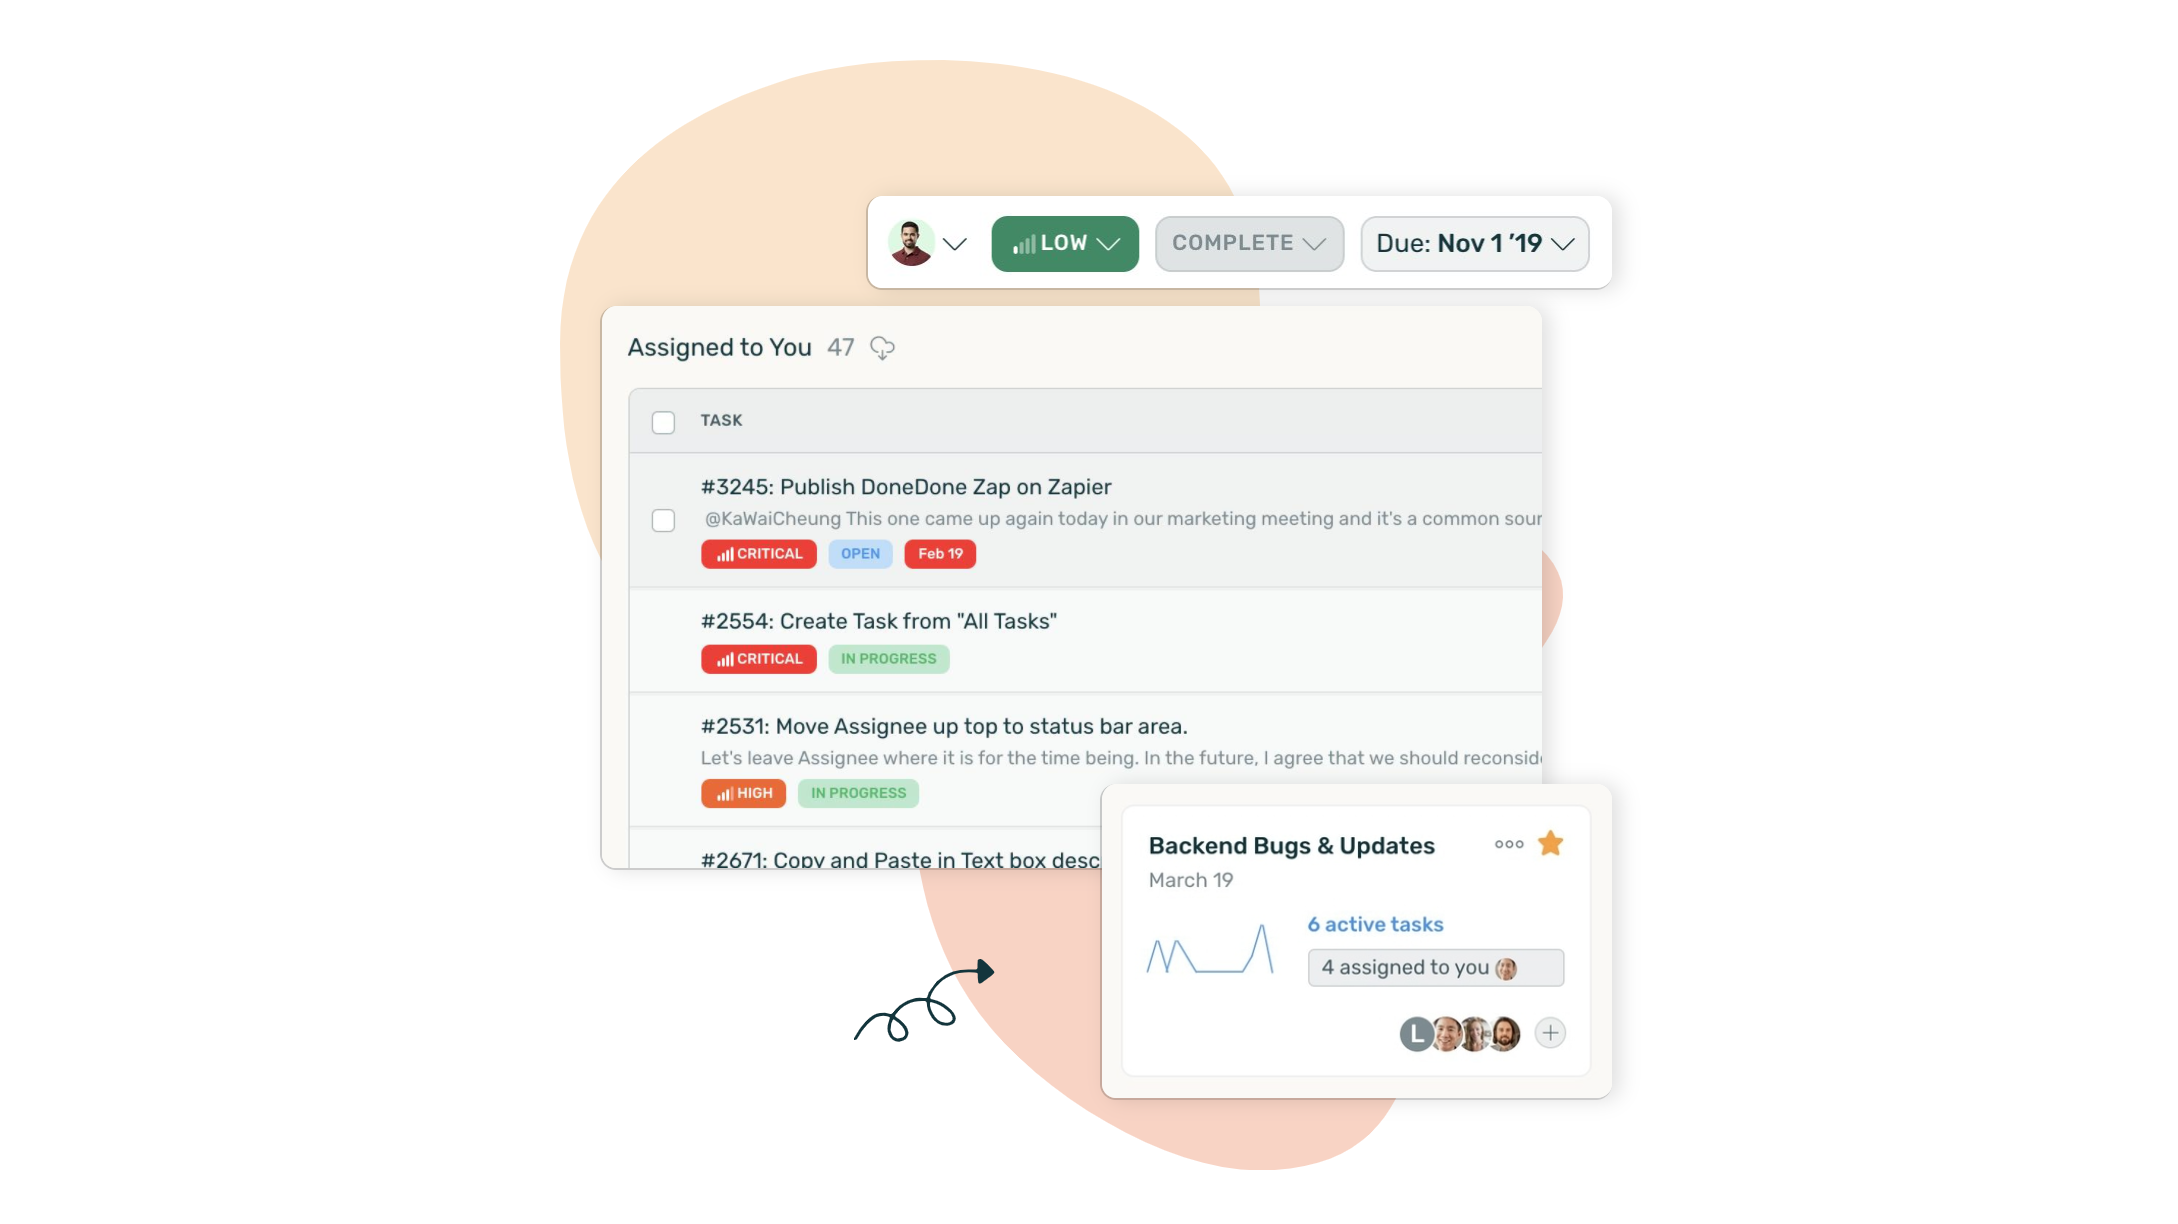 DoneDone helps teams organize & execute. Use DoneDone Projects instead of messy spreadsheets or bulky software for bug, task, and issue tracking.